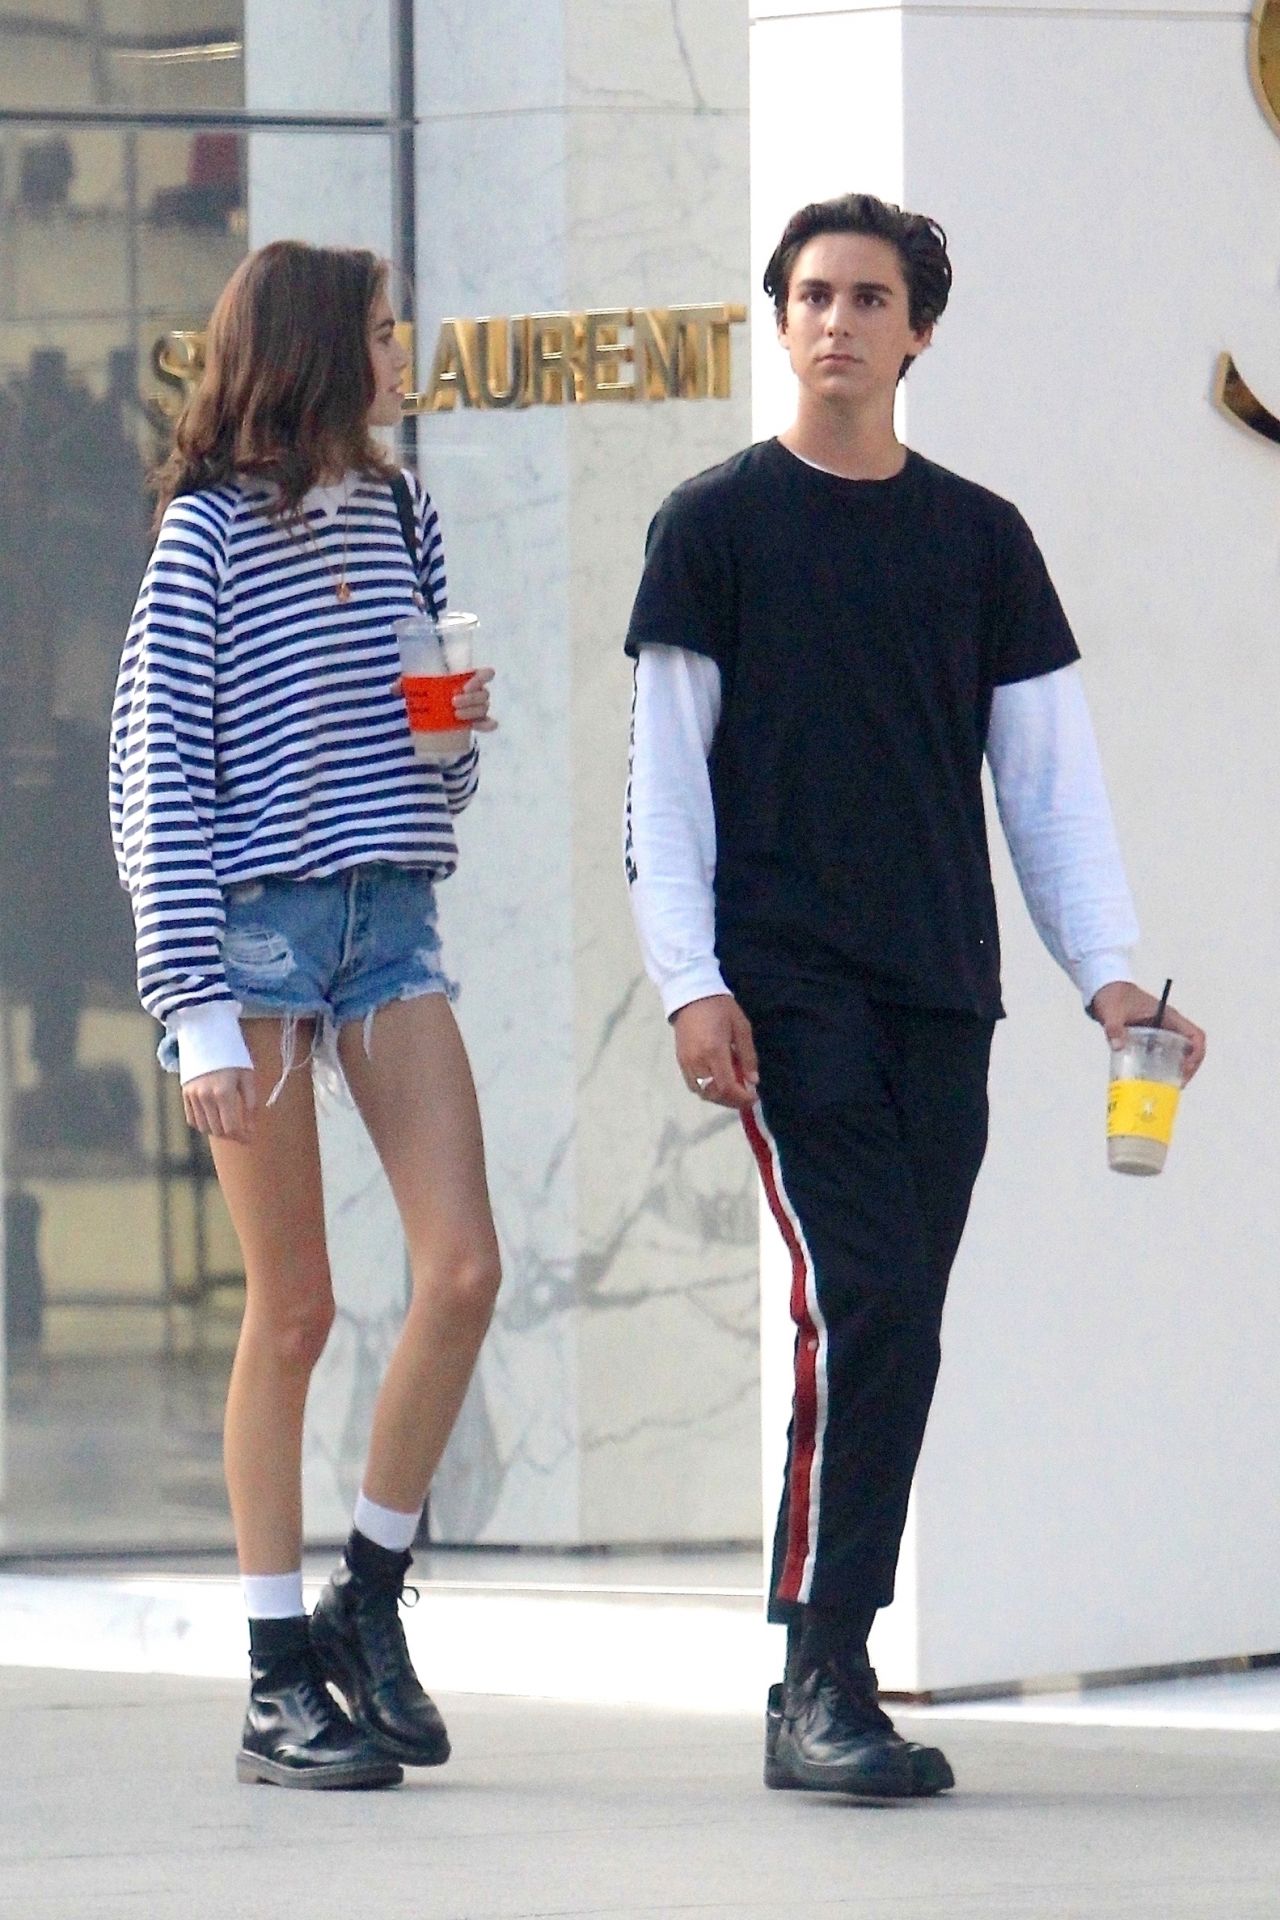 kaia-gerber-and-friend-travis-jackson-out-together-in-los-angeles-06-21-2018-4.jpg